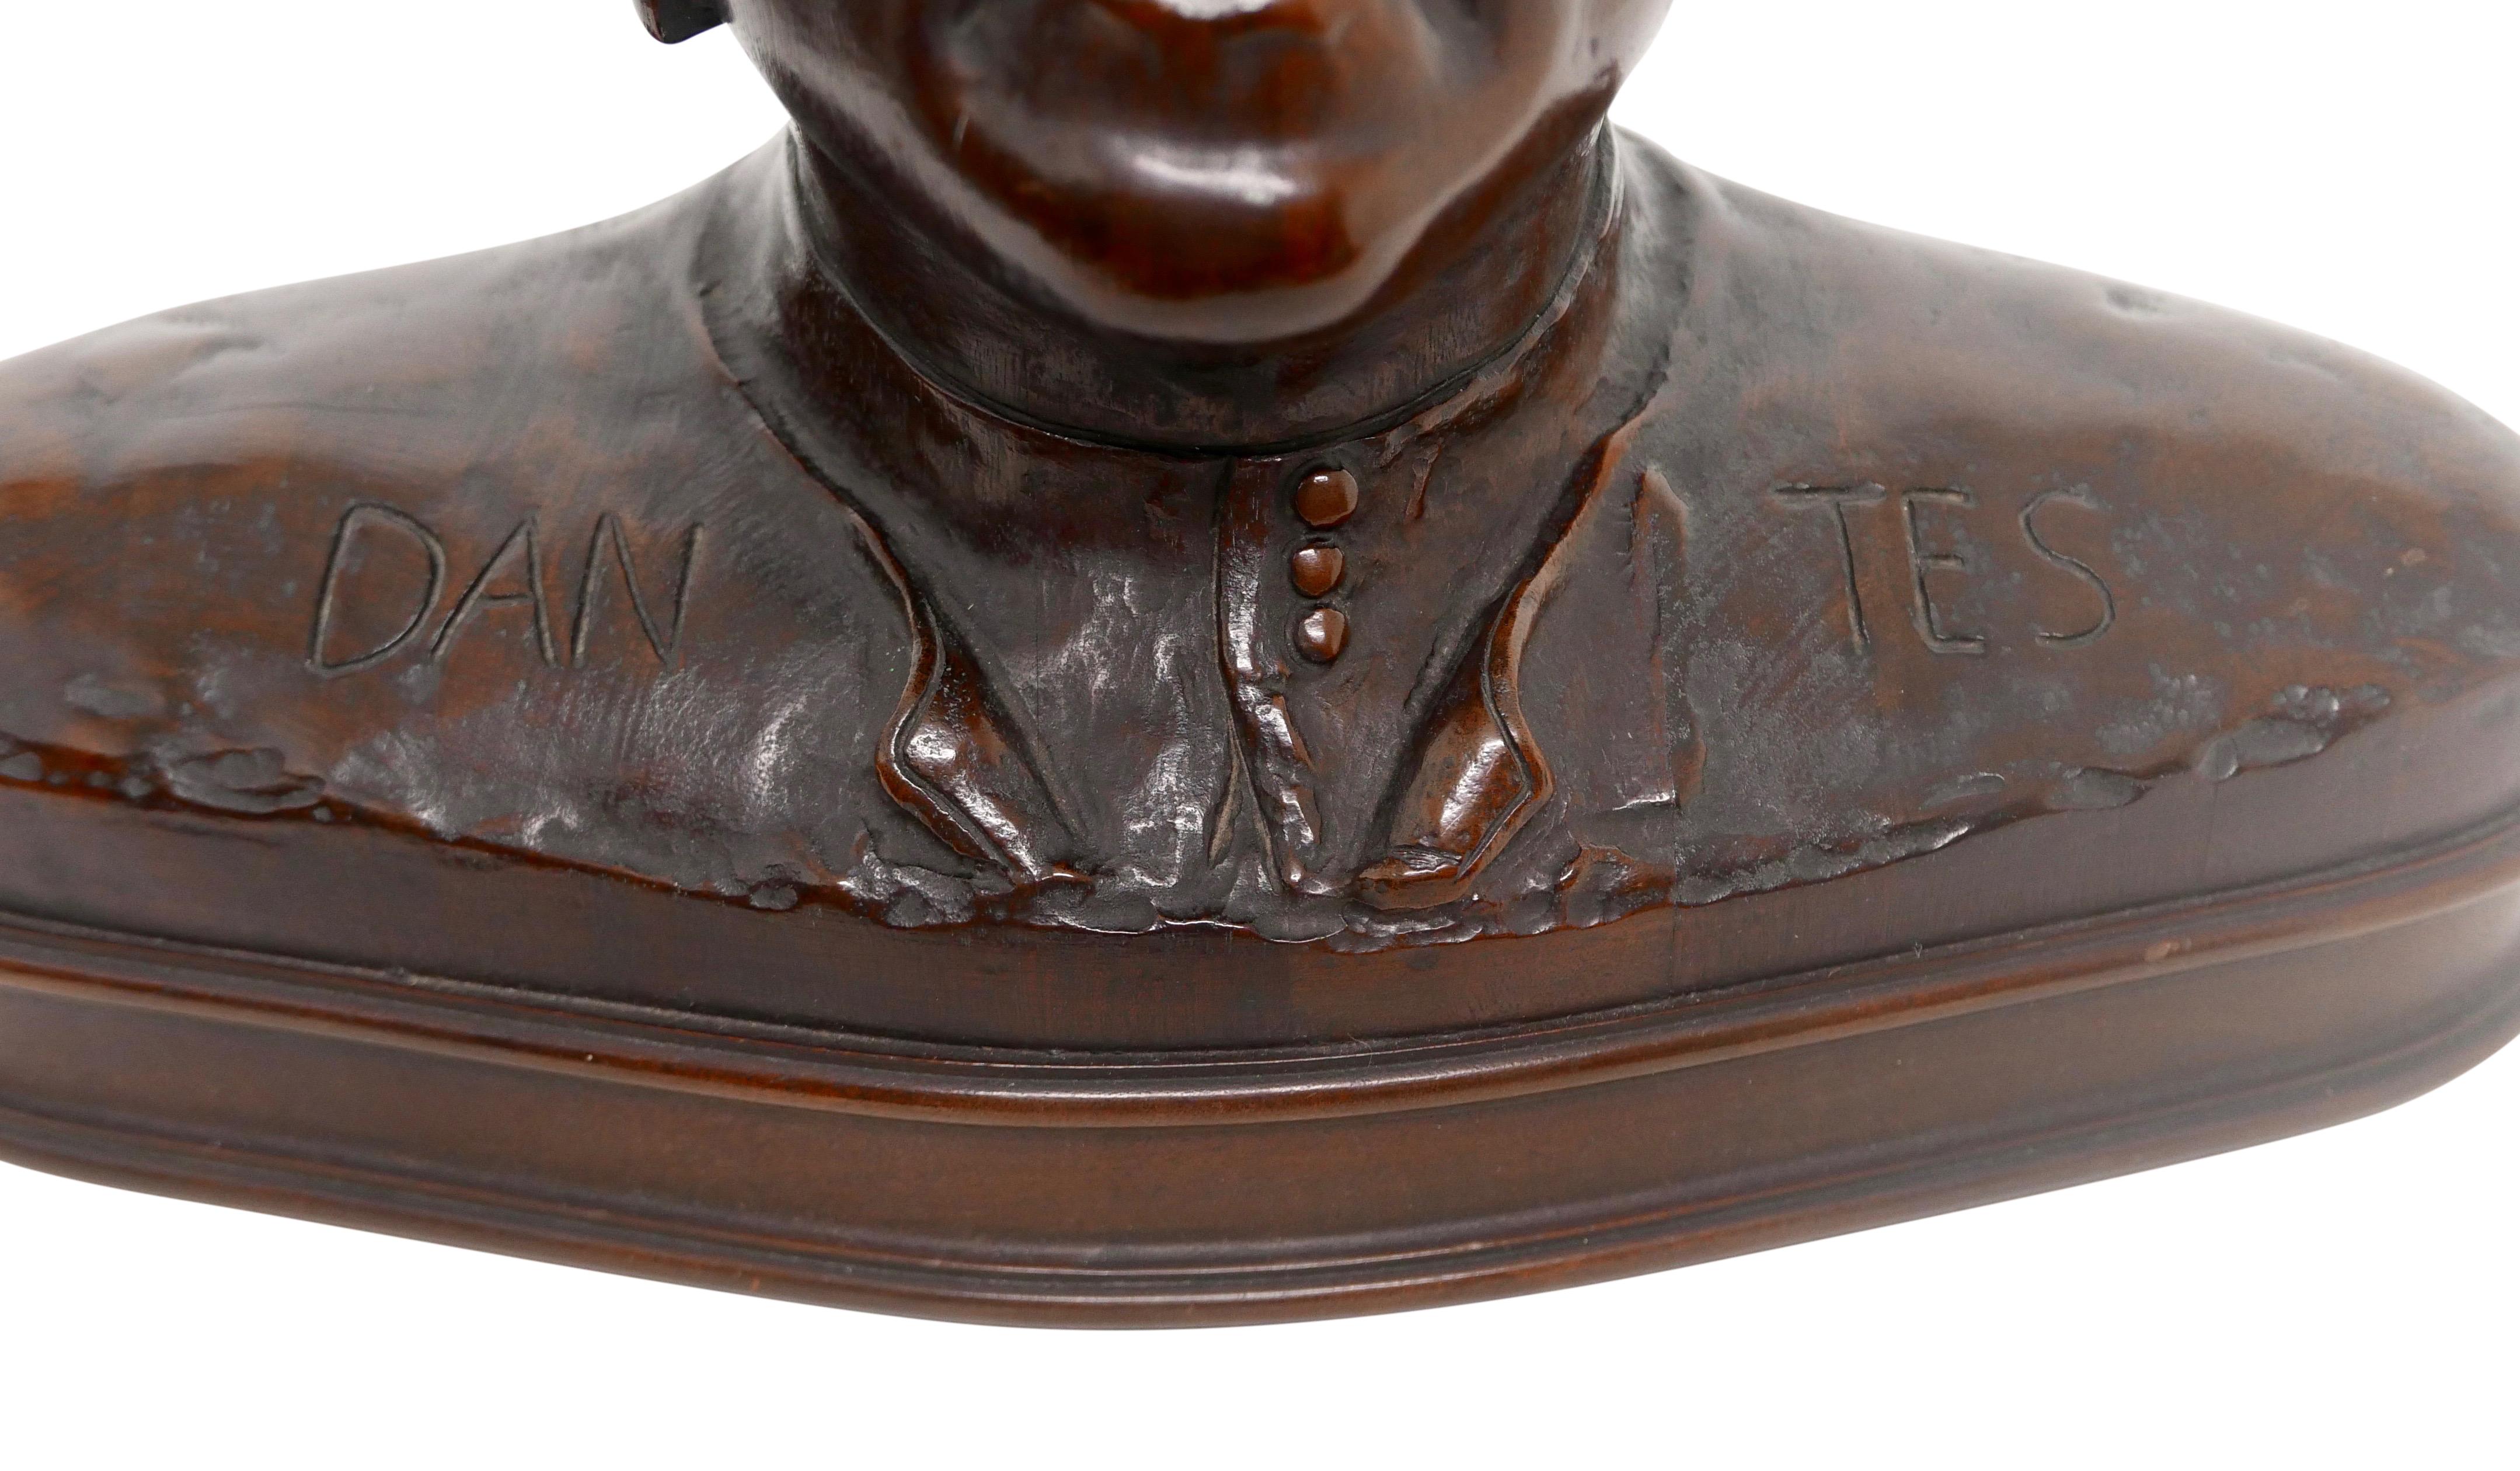 Hand Carved Wooden Bust Sculpture of Dantes, Early 20th Century 3